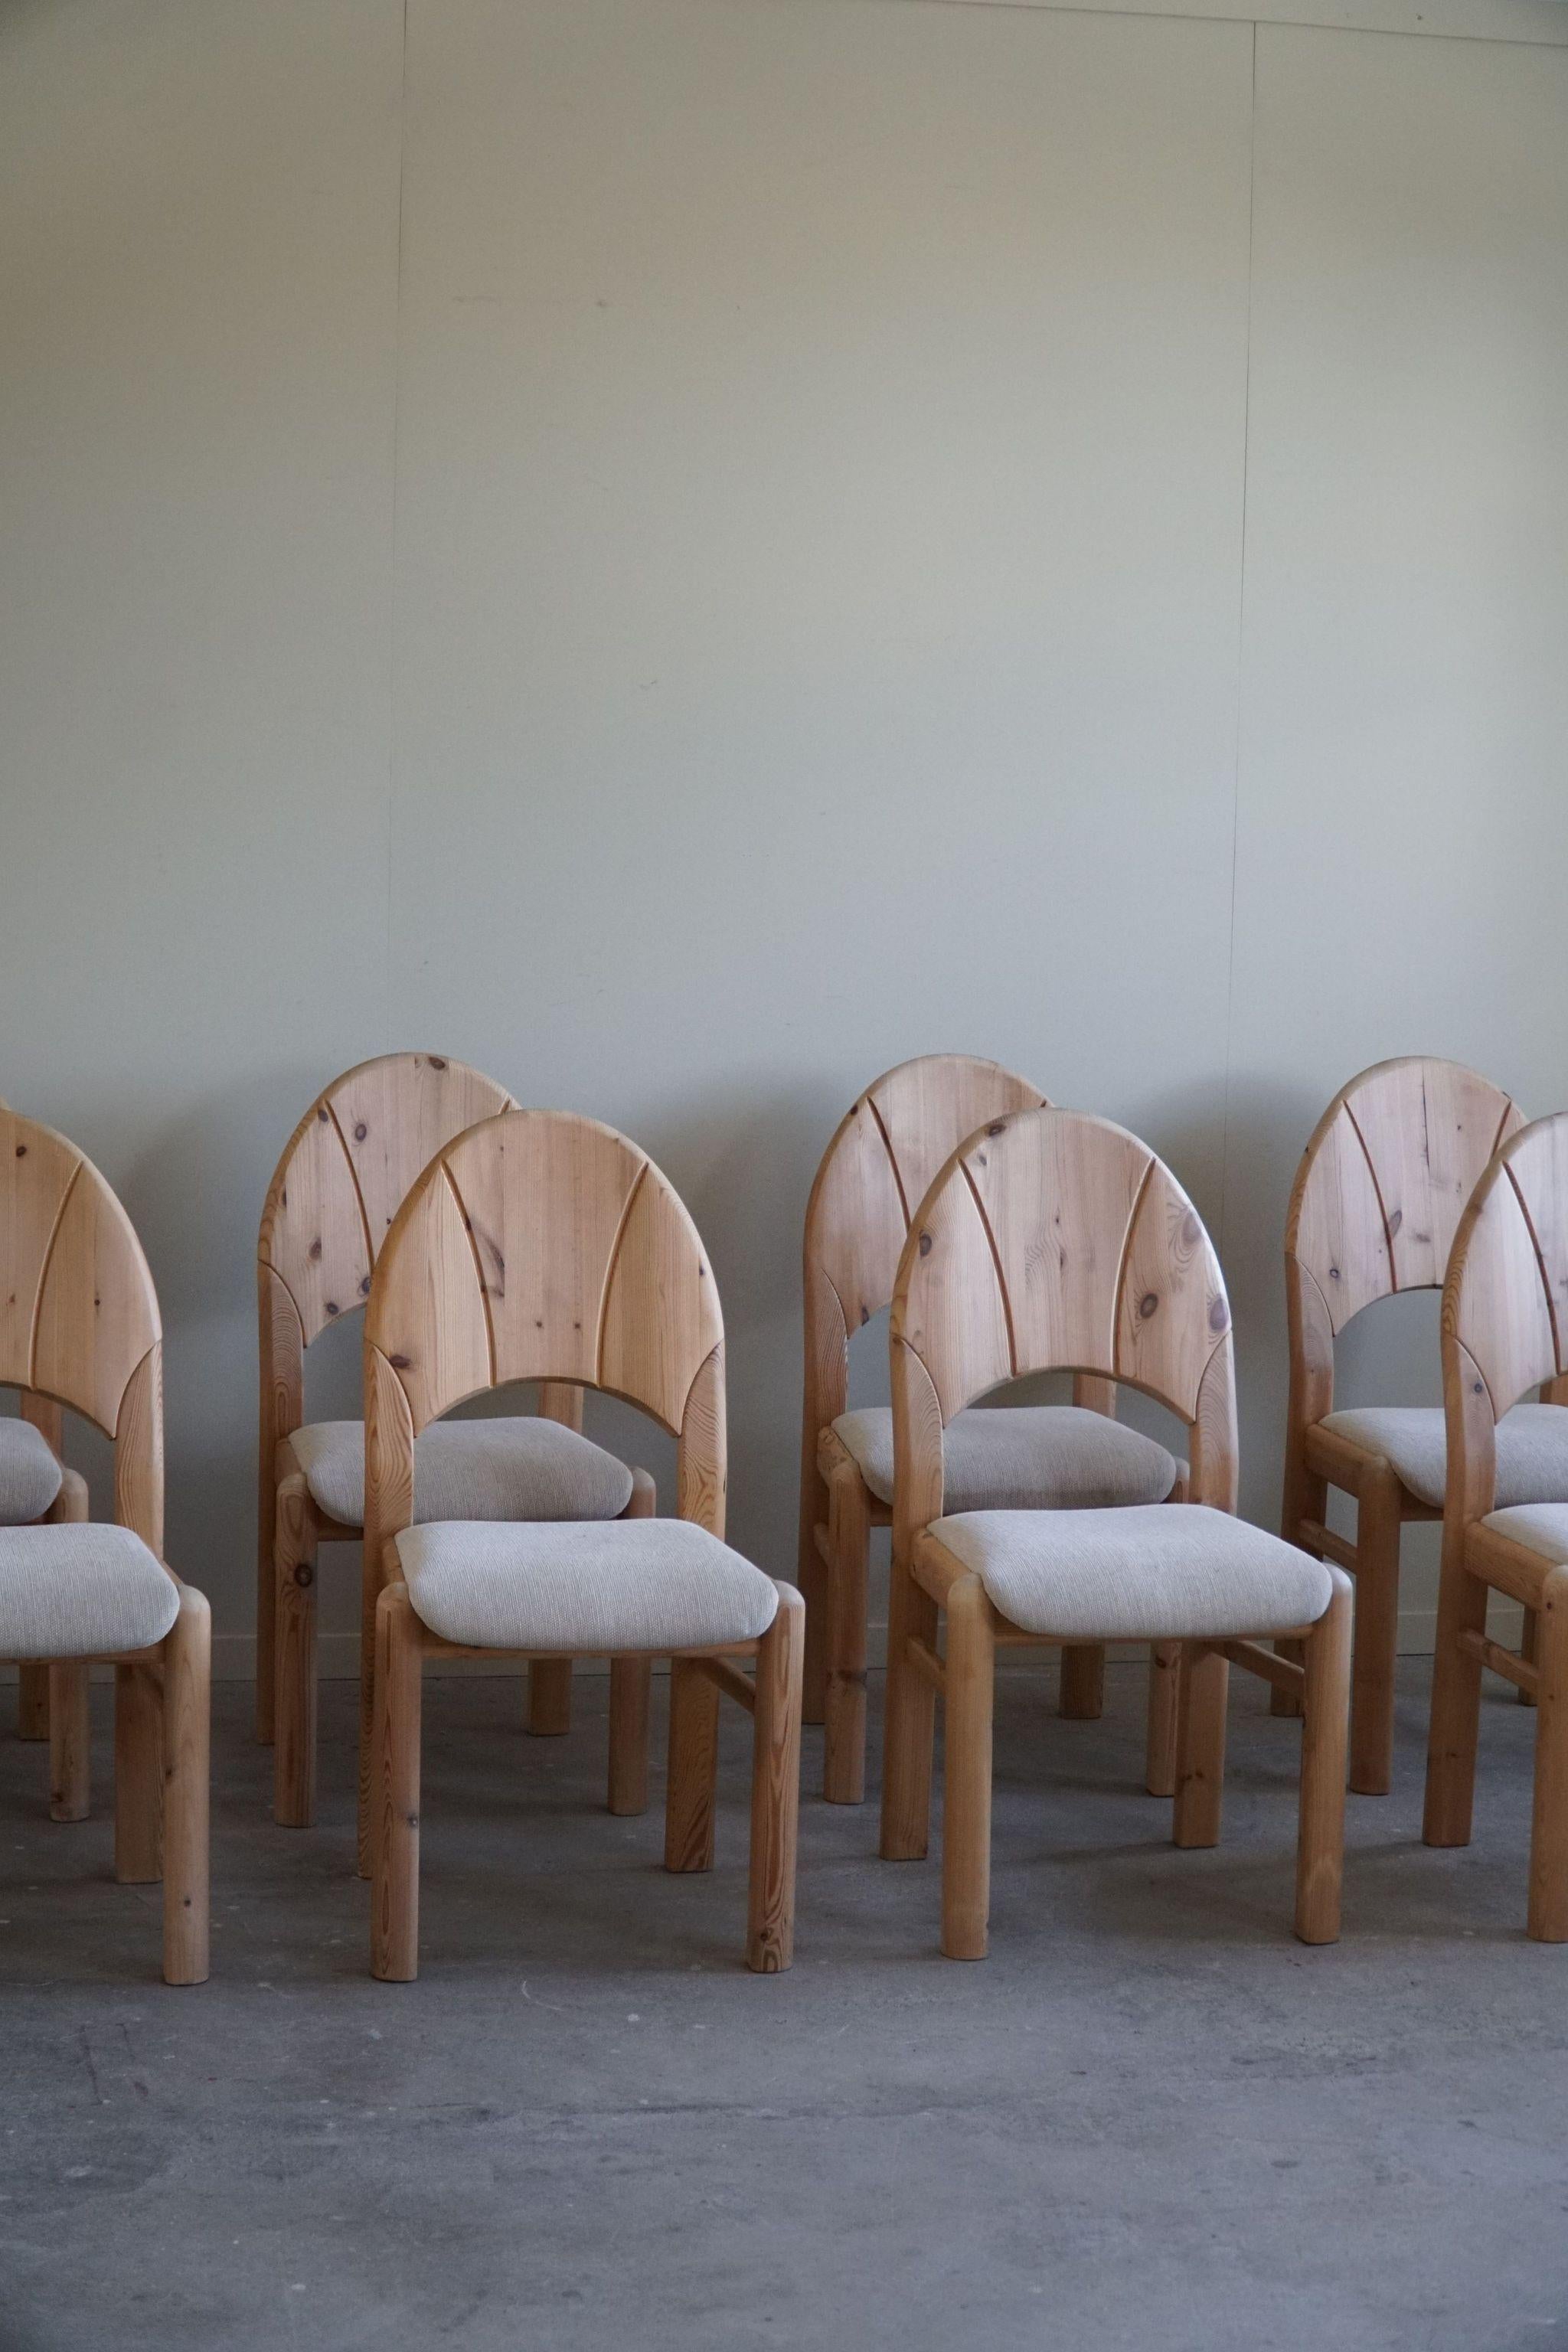 A neat set of 8 sculptural dining chairs in solid pine, upholstered in a fine quality wool. Made by a Danish cabinetmaker in the 1970s. These chairs have a really strong impression that pairs well with many types of interior styles. A Modern,